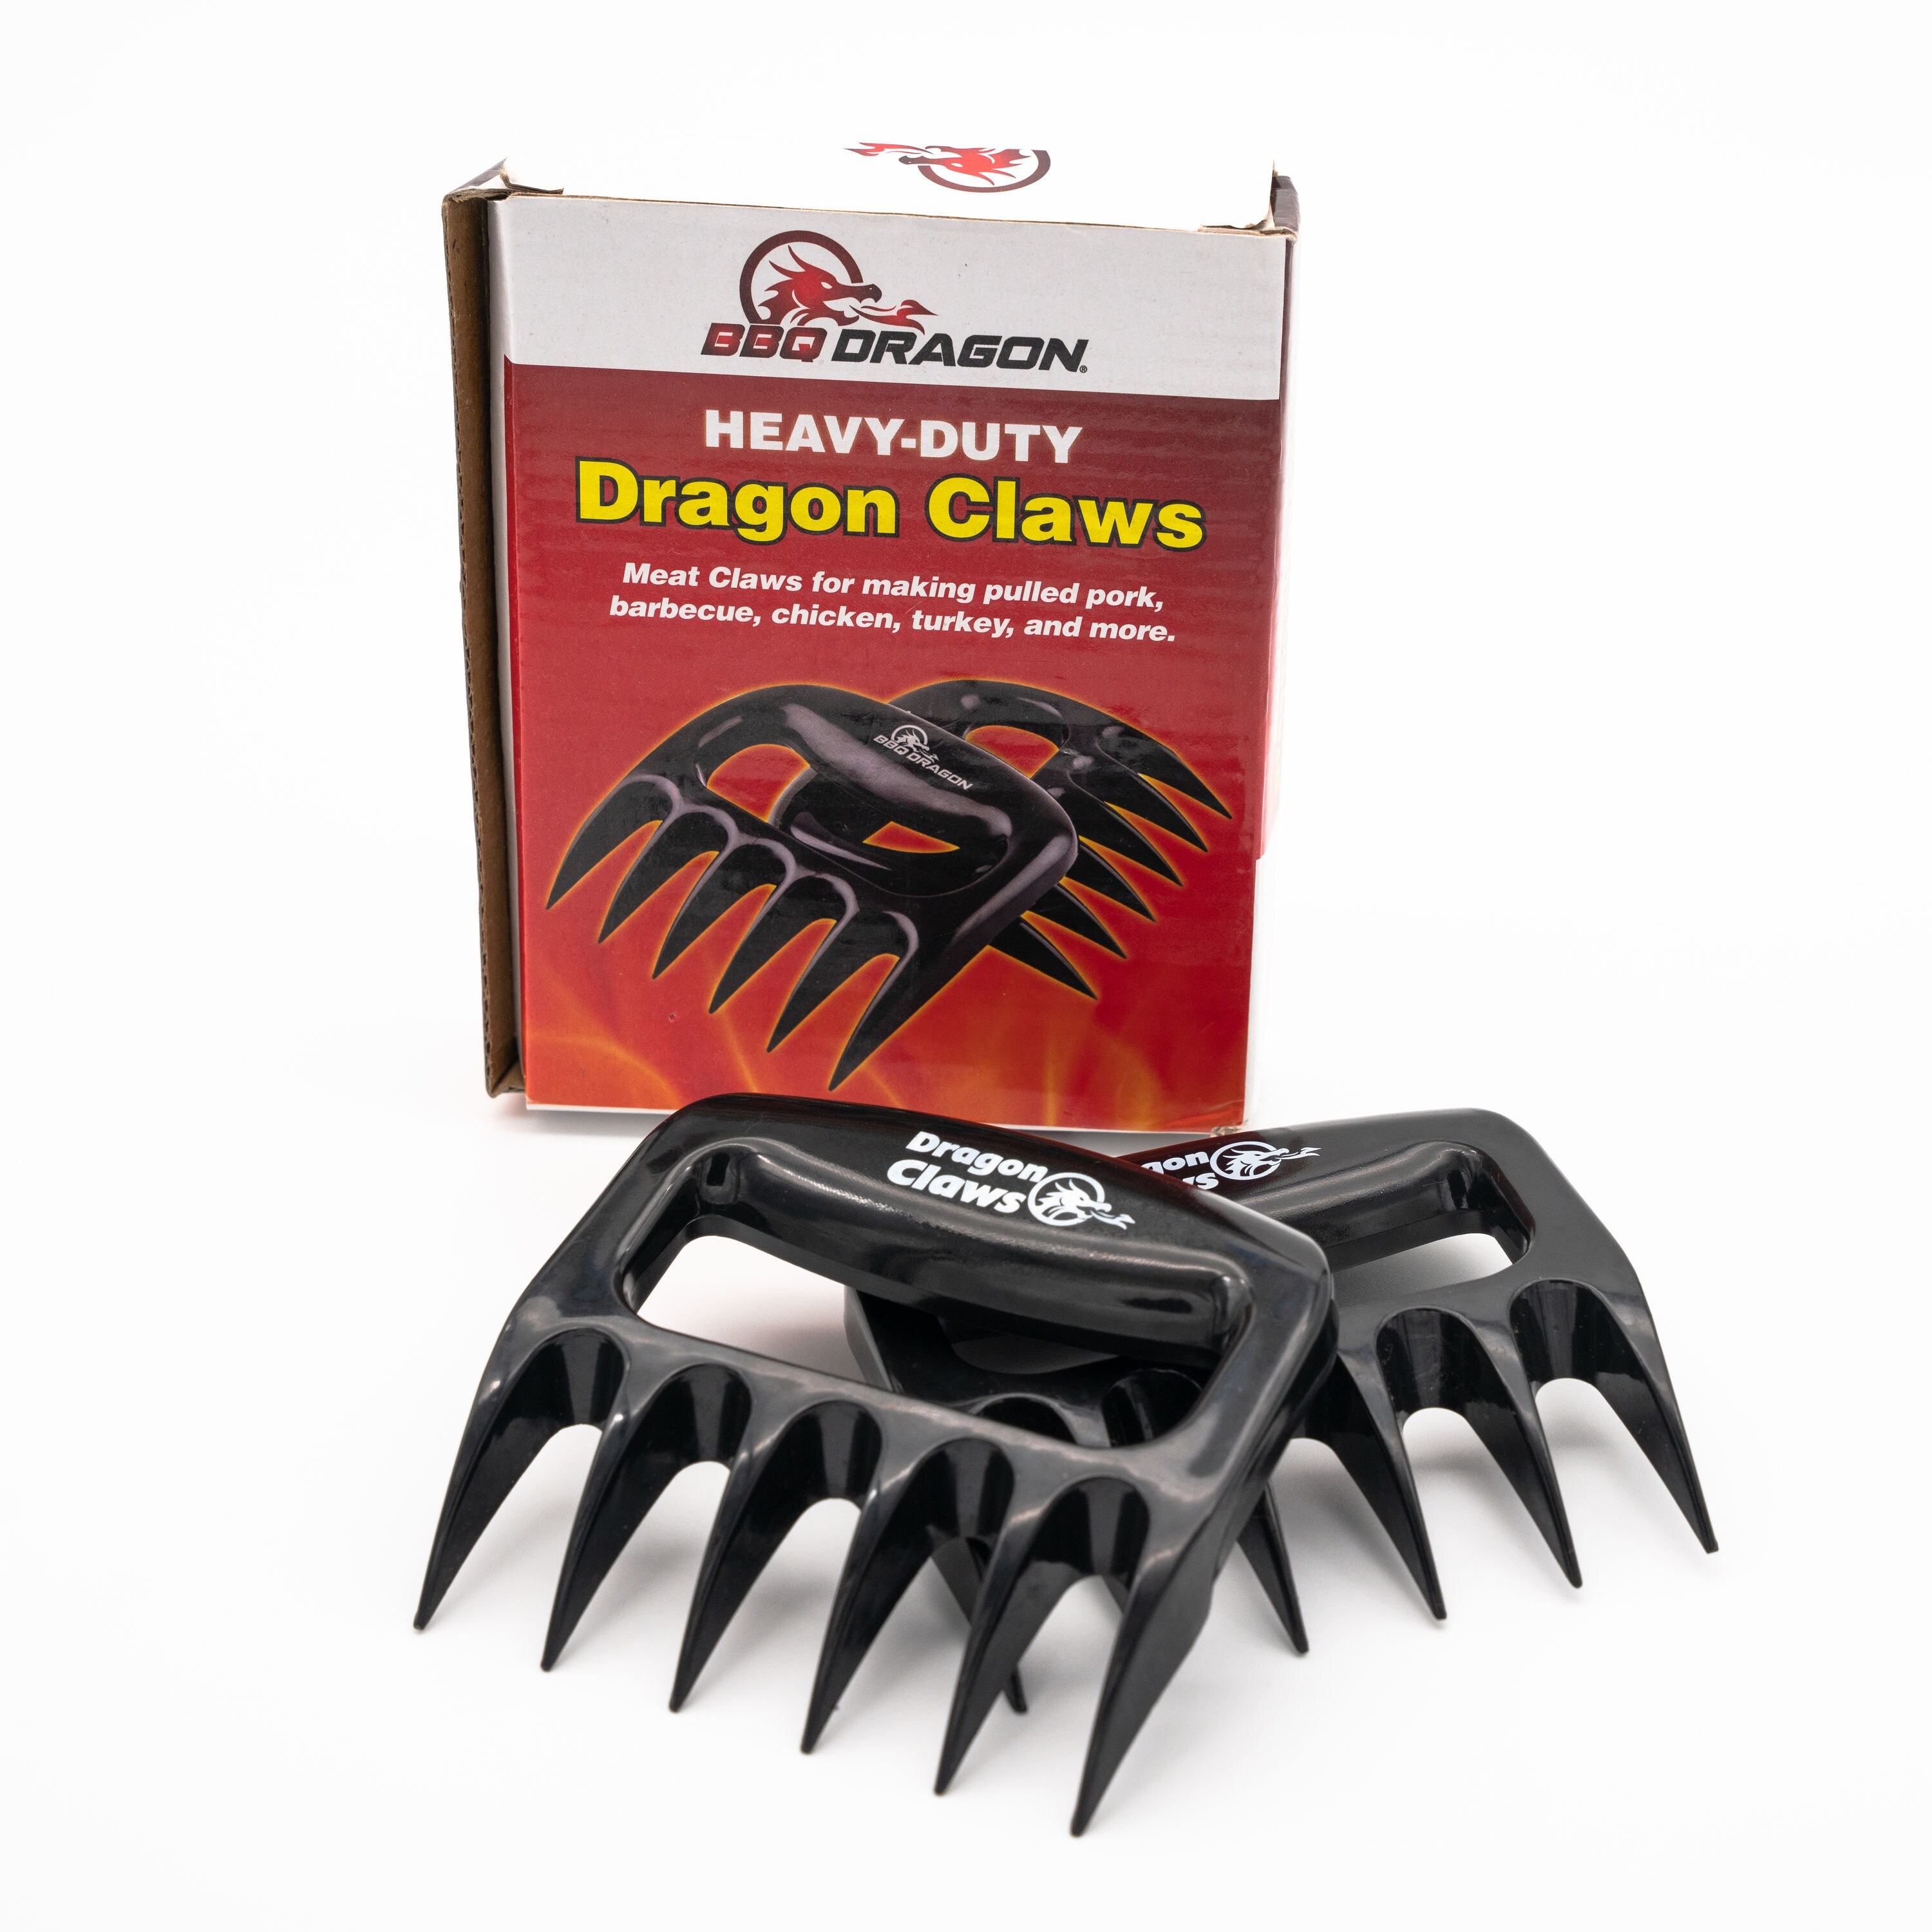 Meat Shredder Claws, Shredding Claws, Meat Claws For Shredding Pulled Pork  Chicken And Beef, Barbecue Meat Shredder, Grilling Meat Shredding Tool,  Heat Resistant And Insulation, Kitchen Utensils, Kitchen Supplies, Back To  School